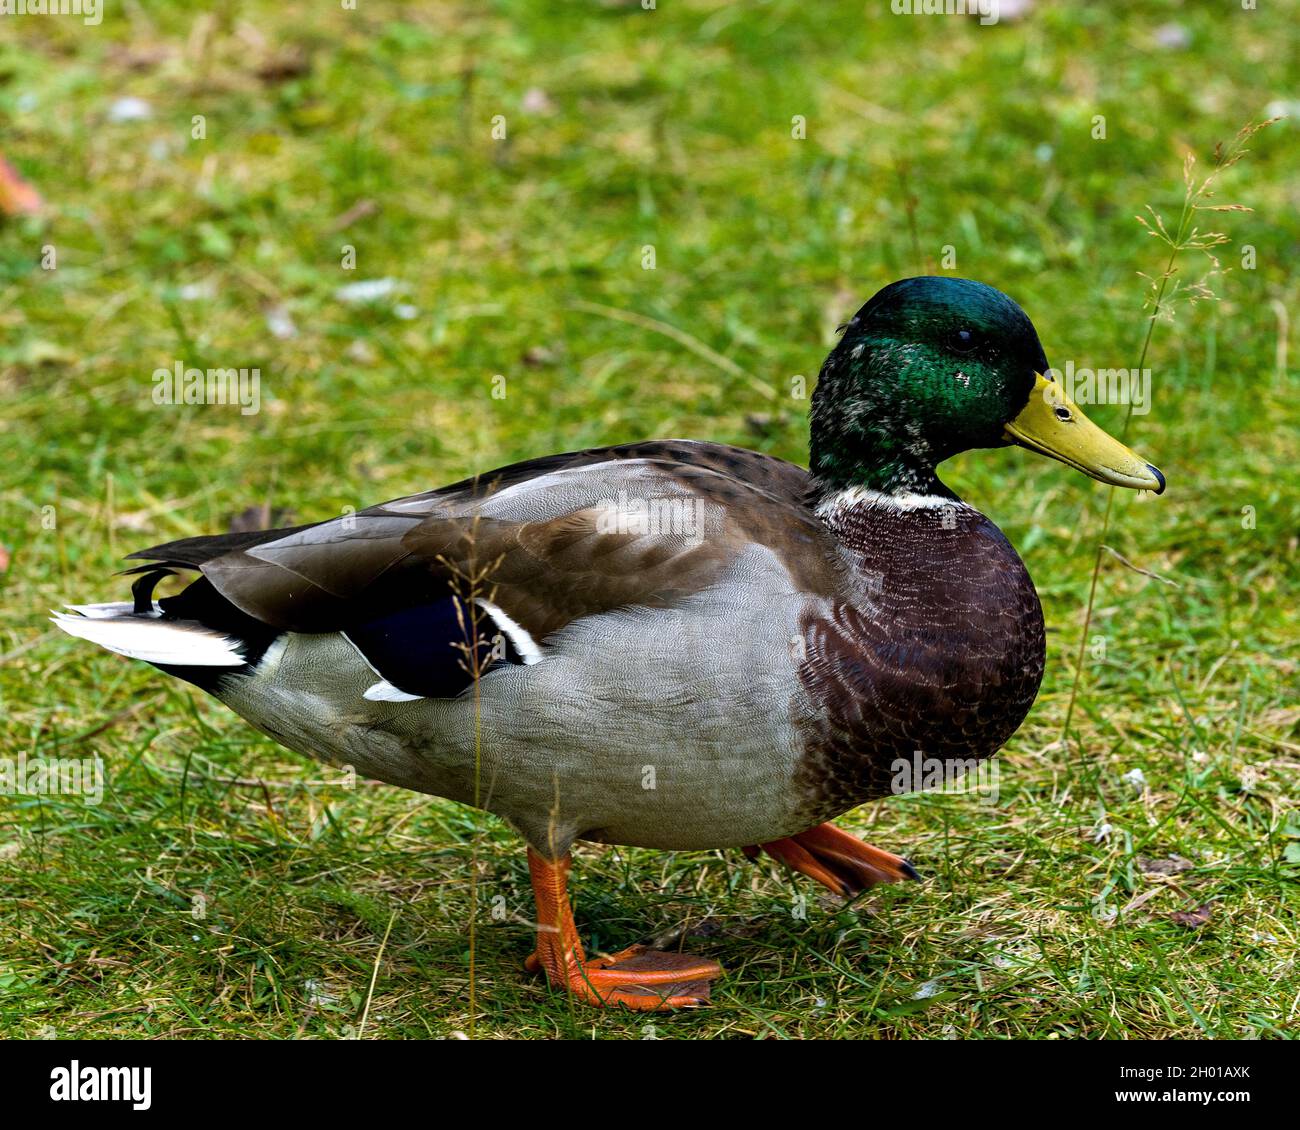 Mallard duck walking on grass with a side view displaying its beautiful plumage and yellow feet in its environment and habitat surrounding. Stock Photo